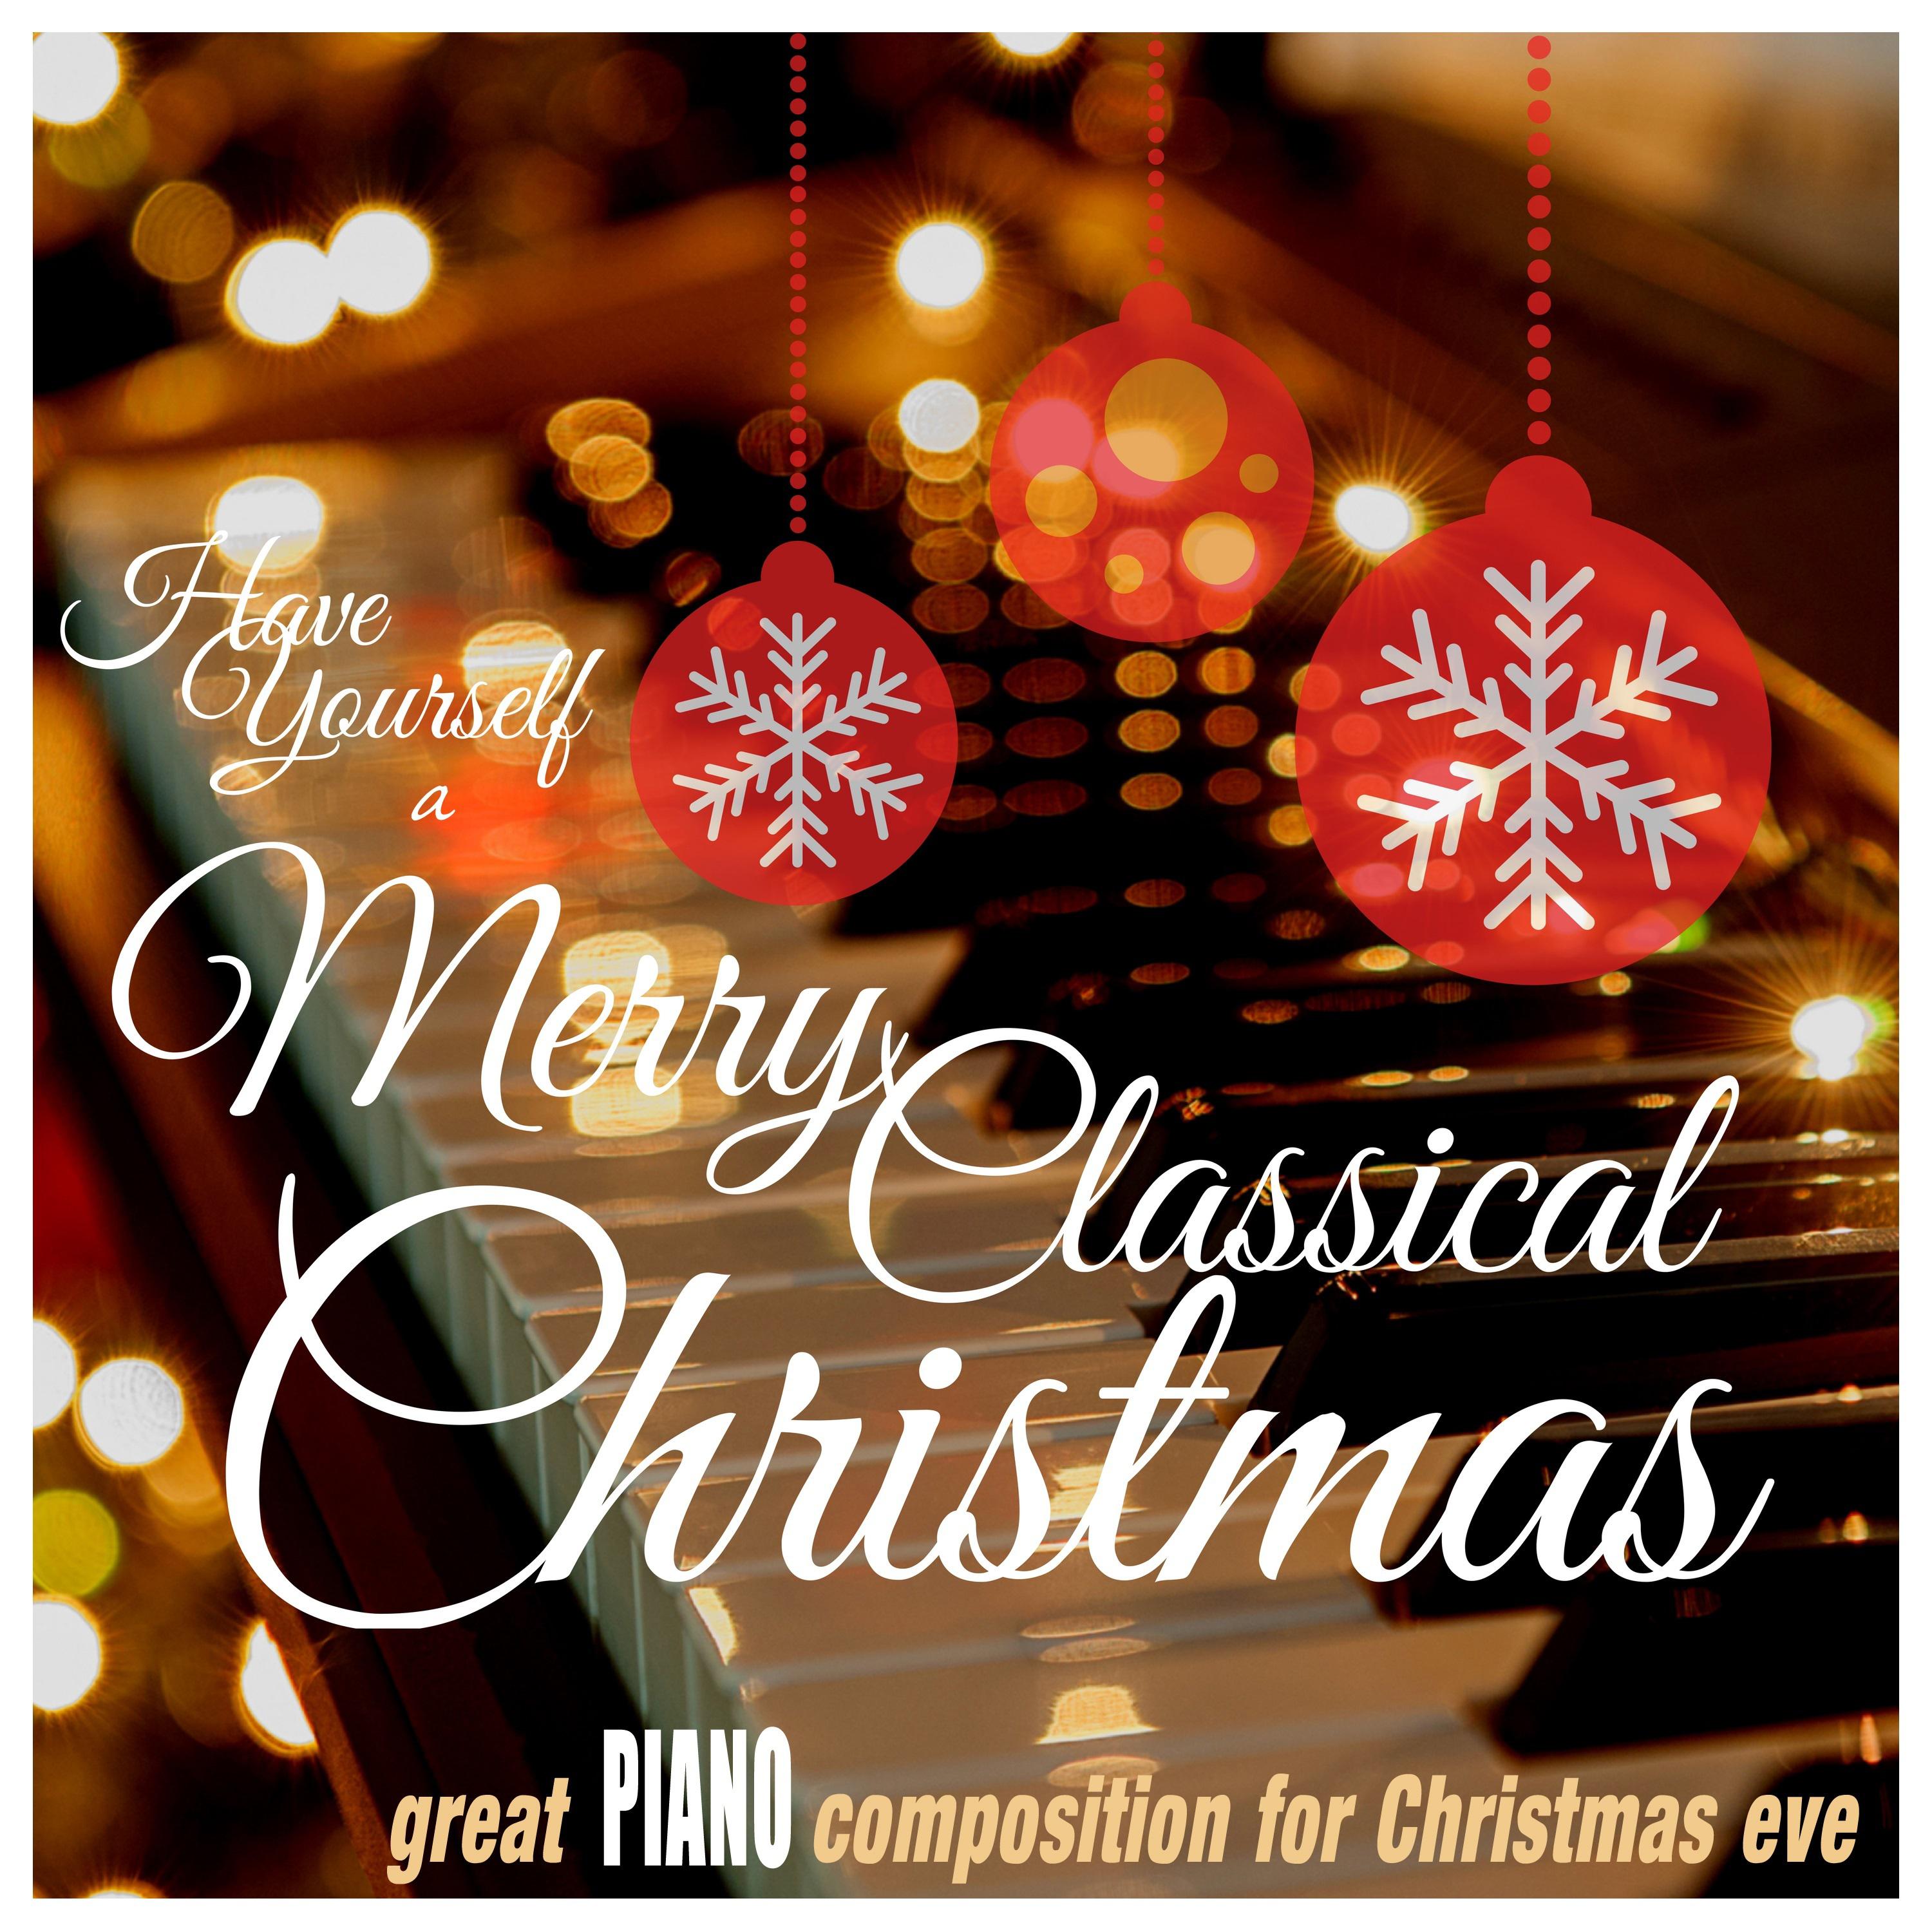 Have Yourself a Merry Classical Christmas: Great Piano Composition for Christmas Eve